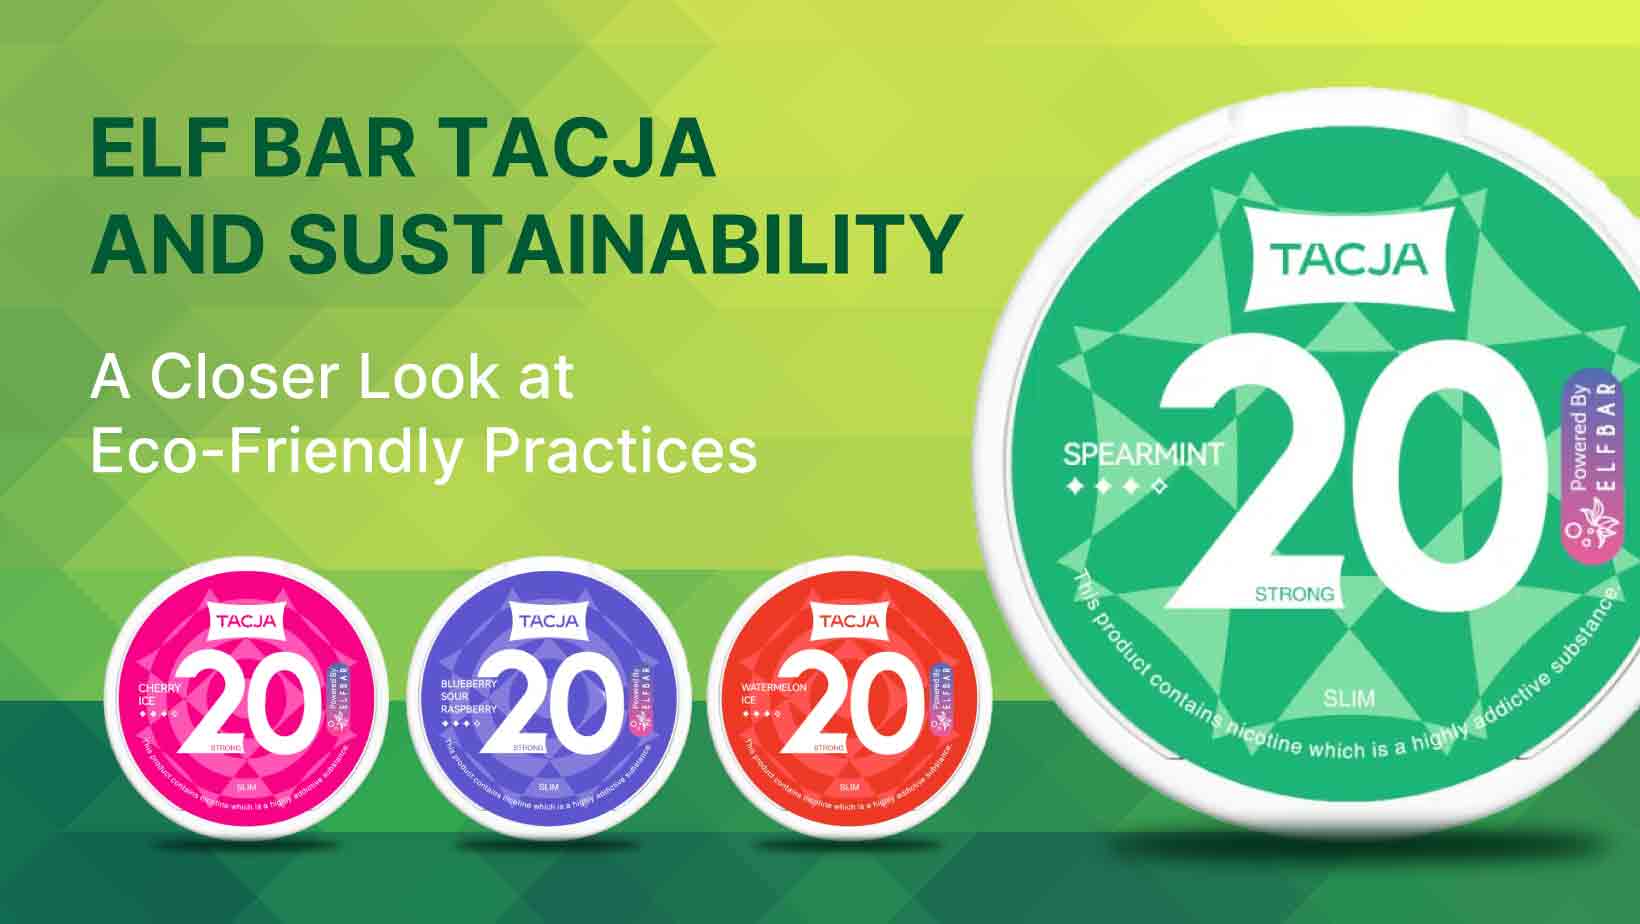 Elf Bar Tacja and Sustainability: A Look at Eco-Friendly Practices